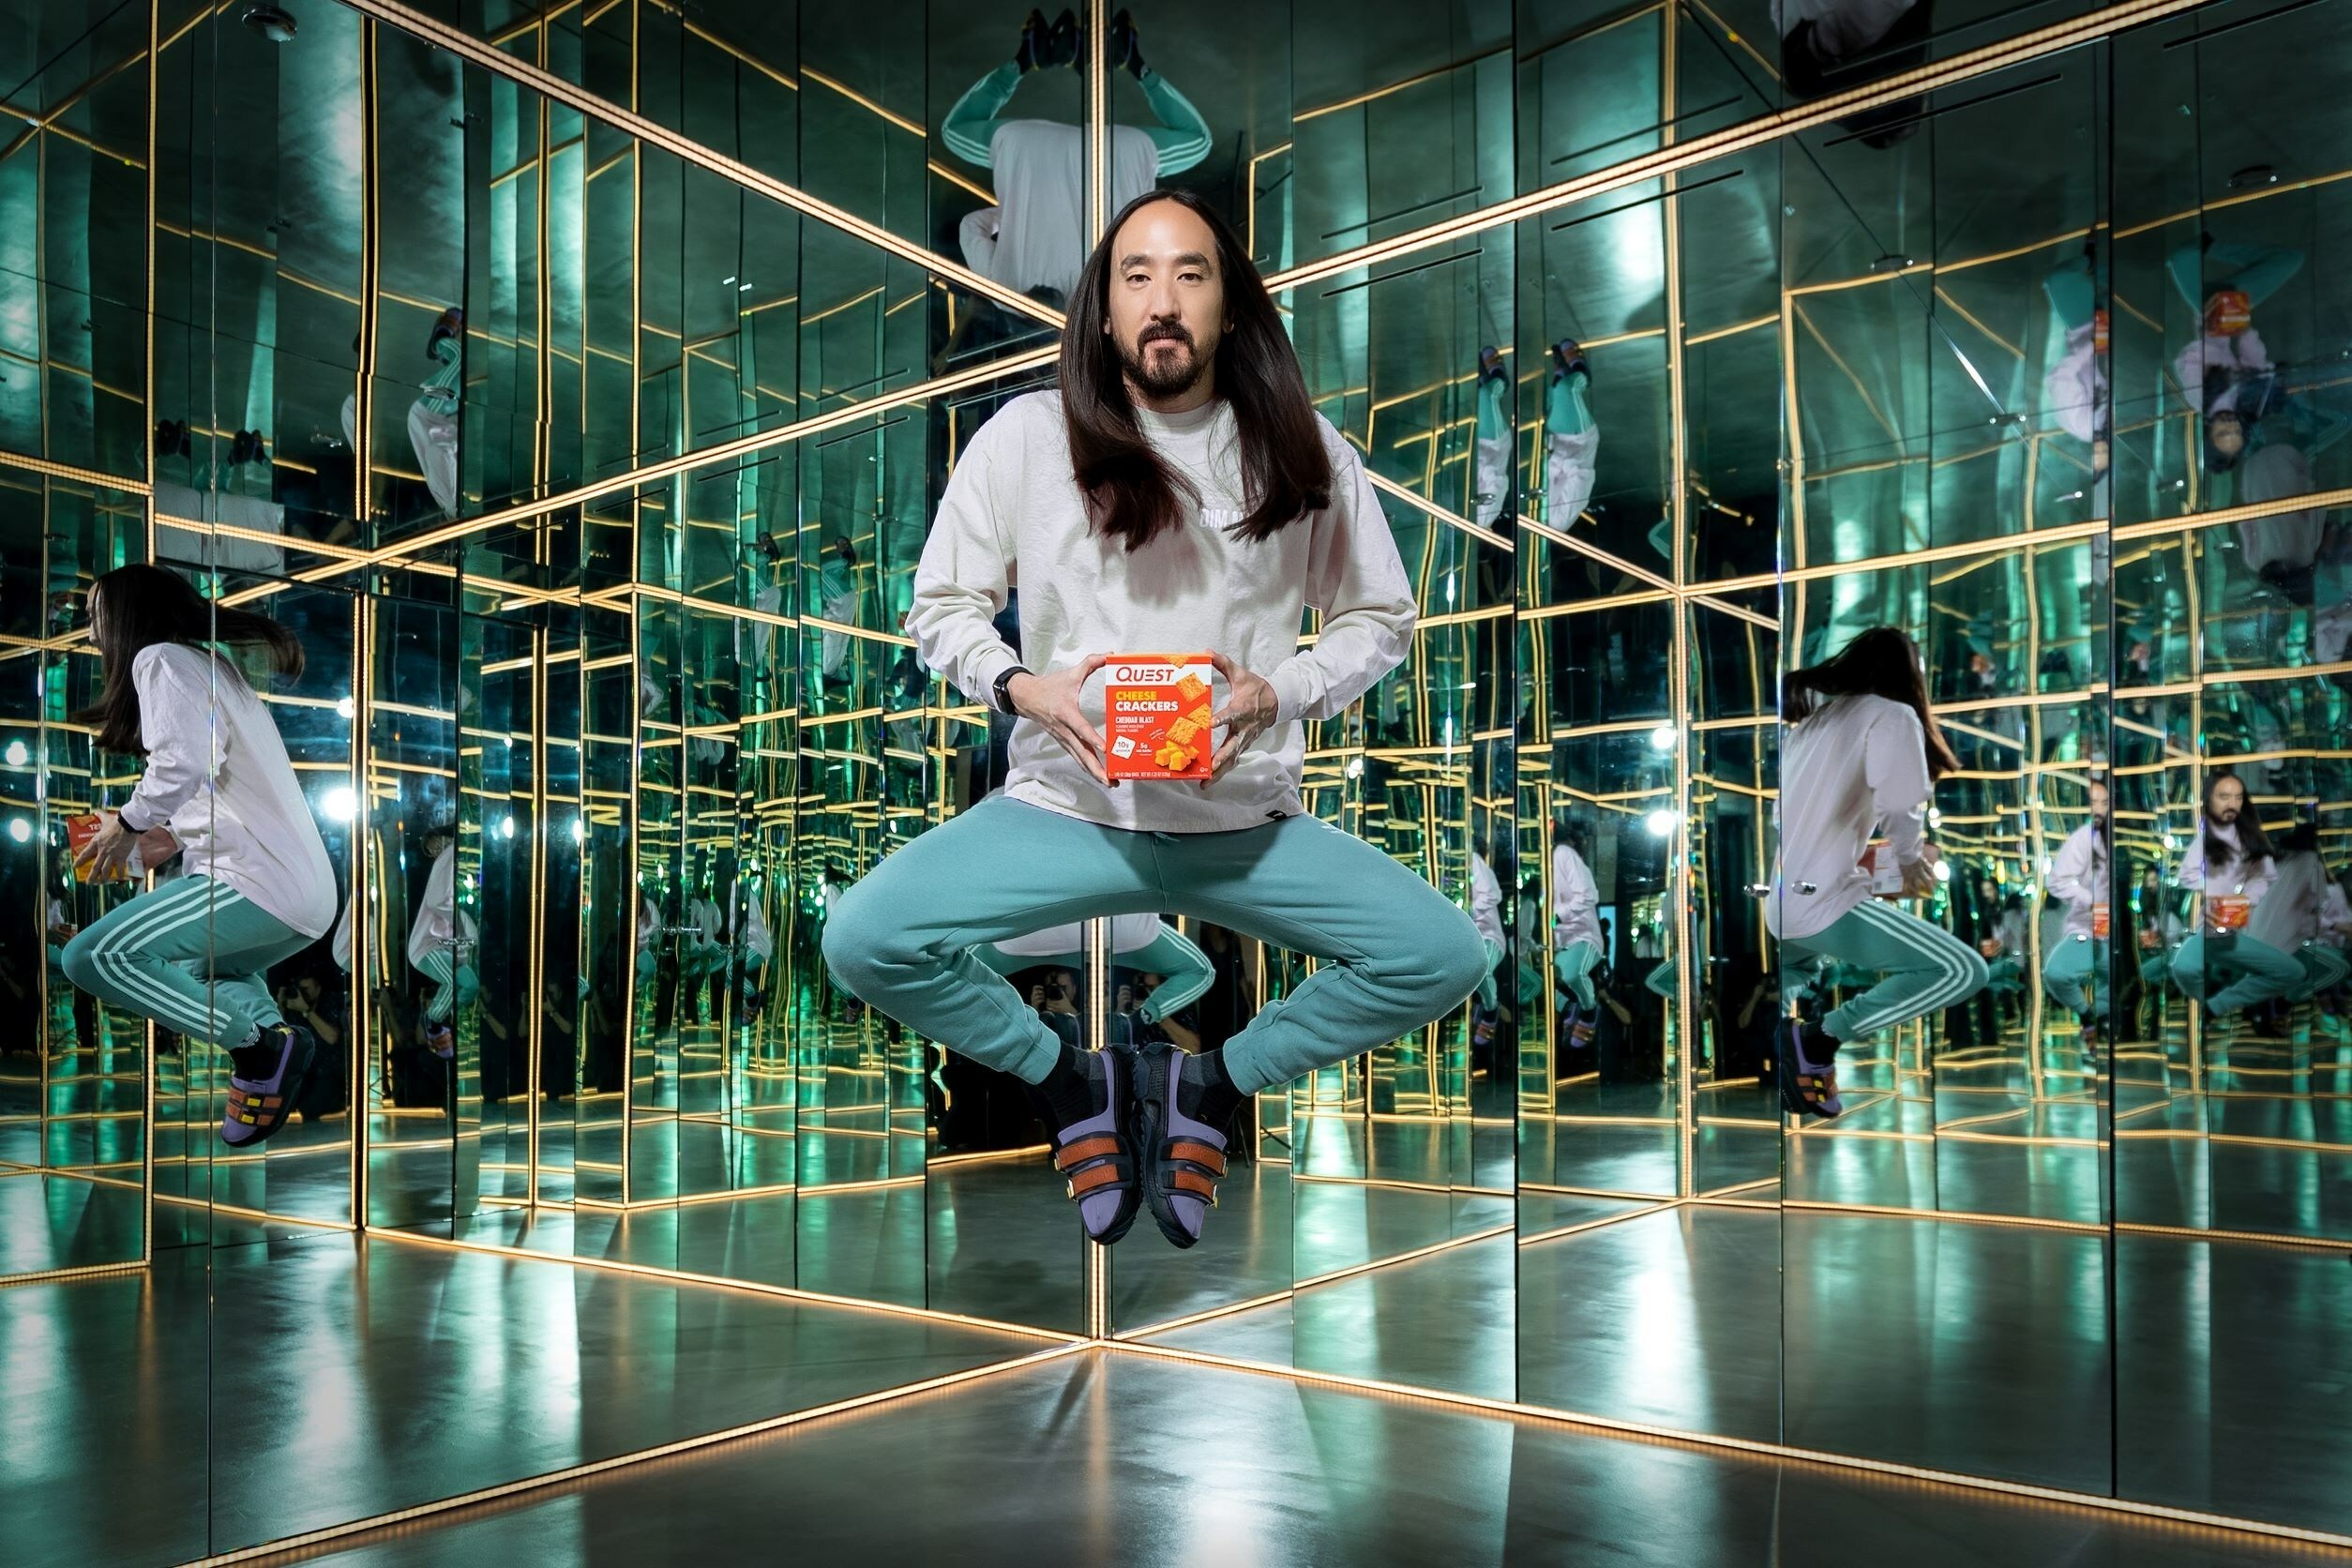 Quest partners with Steve Aoki to launch NEW Quest Cheese Crackers